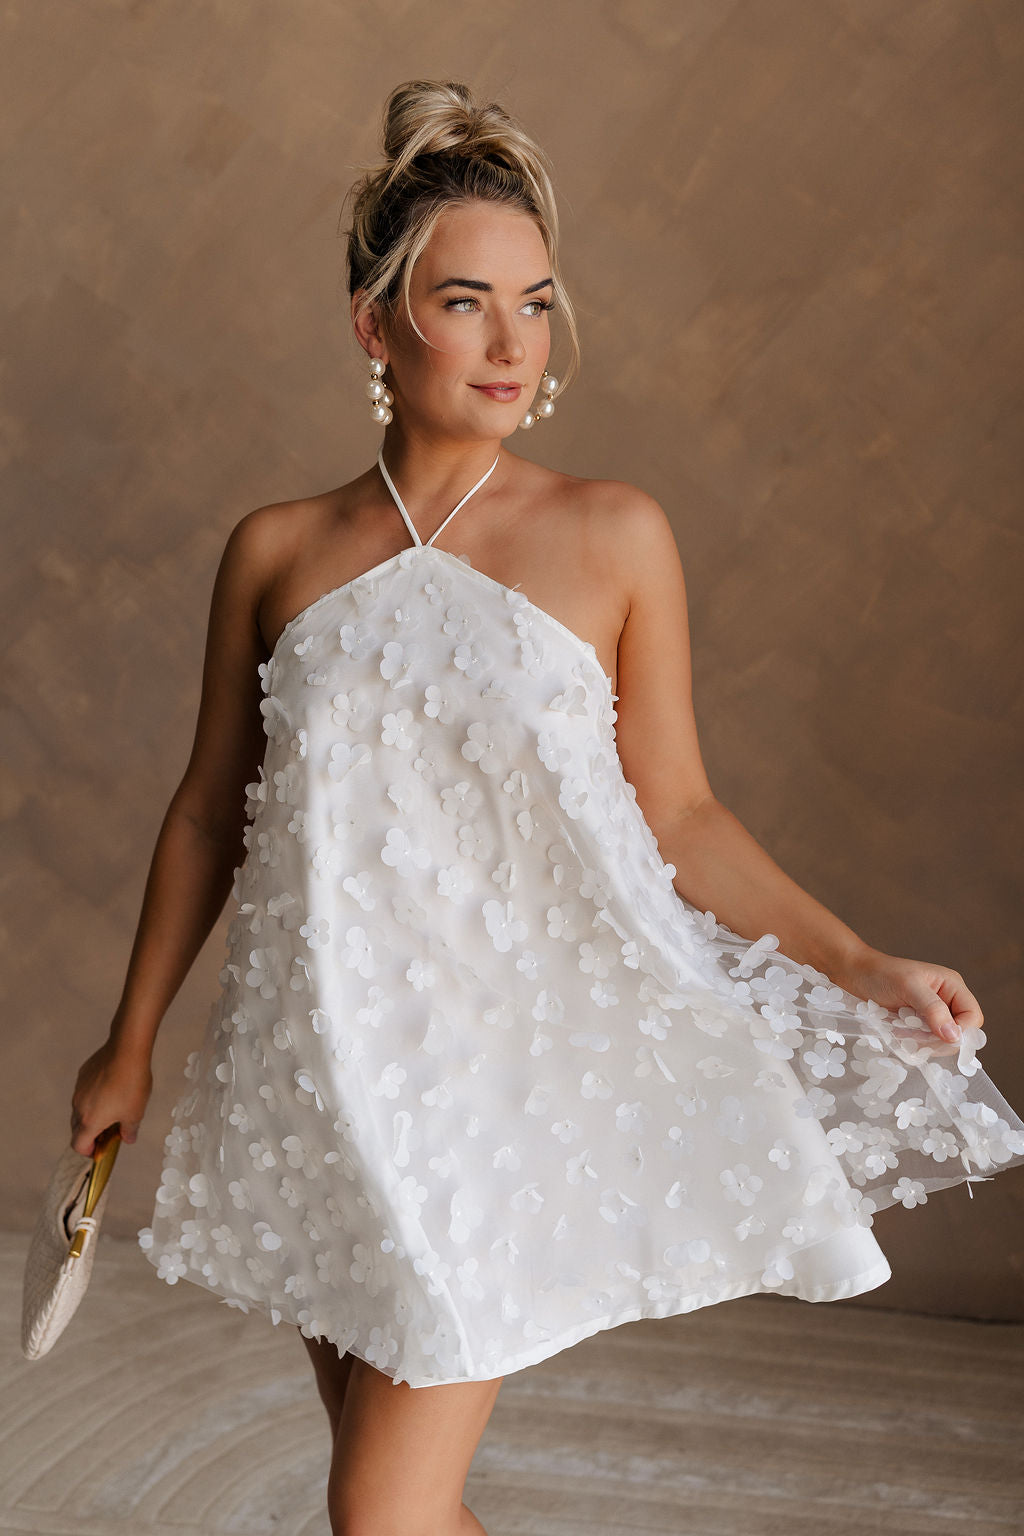 Upper body front view of female model wearing the Meredith White Embellished Floral Dress that has white sheer fabric with 3d floral embellishments, white lining, and a halter neck.